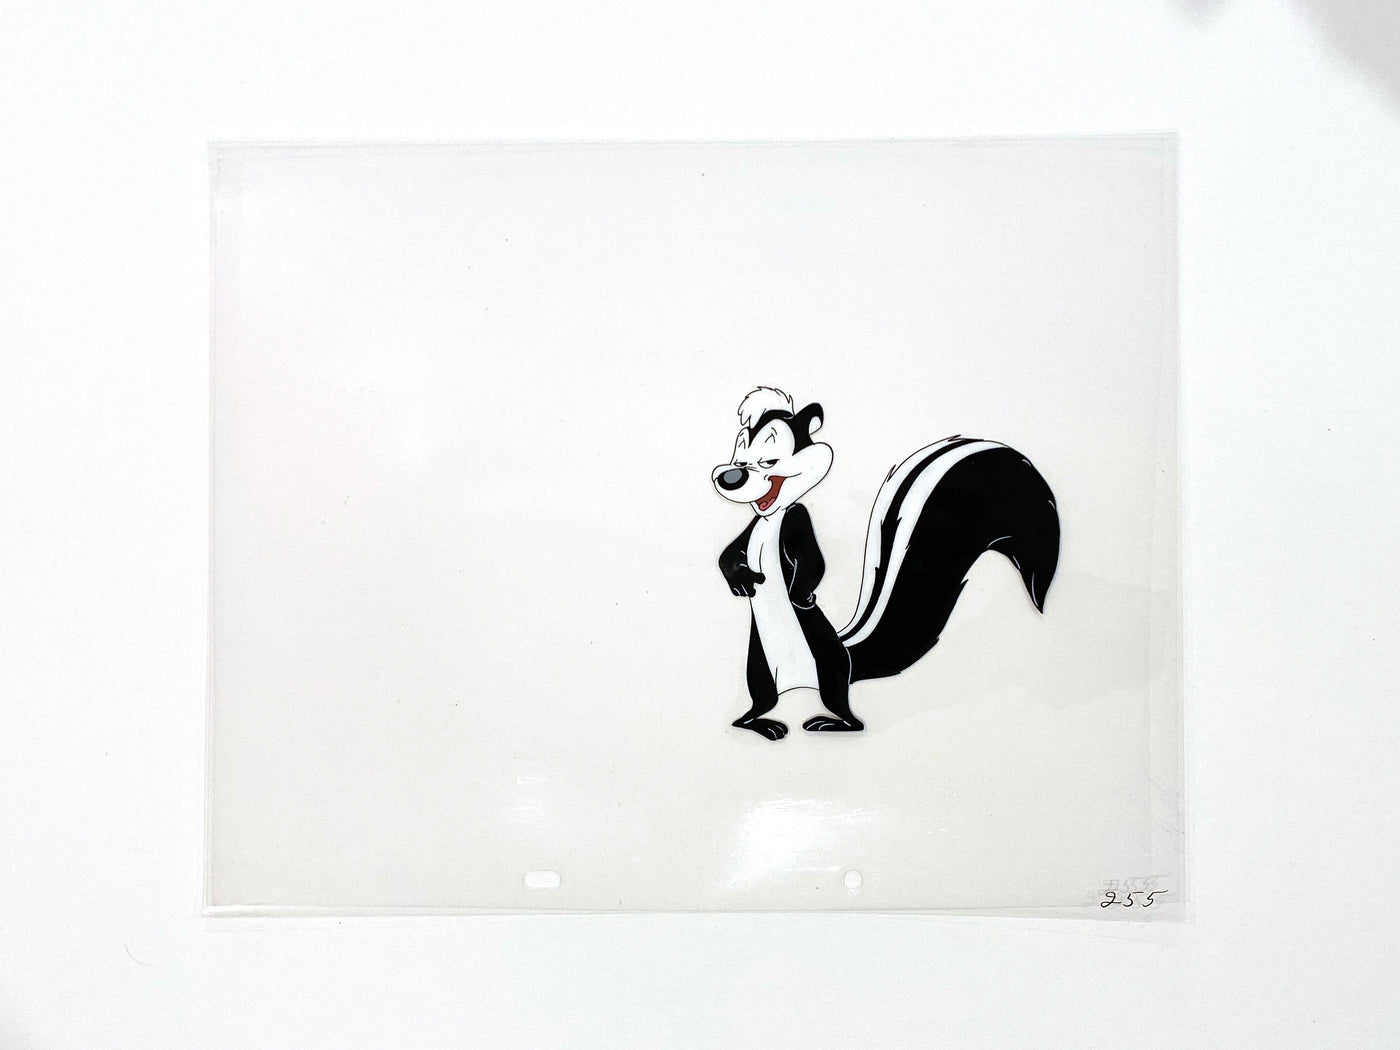 Original Warner Brothers Production Cel of Pepe Le Pew from Past Perfumance (1955)